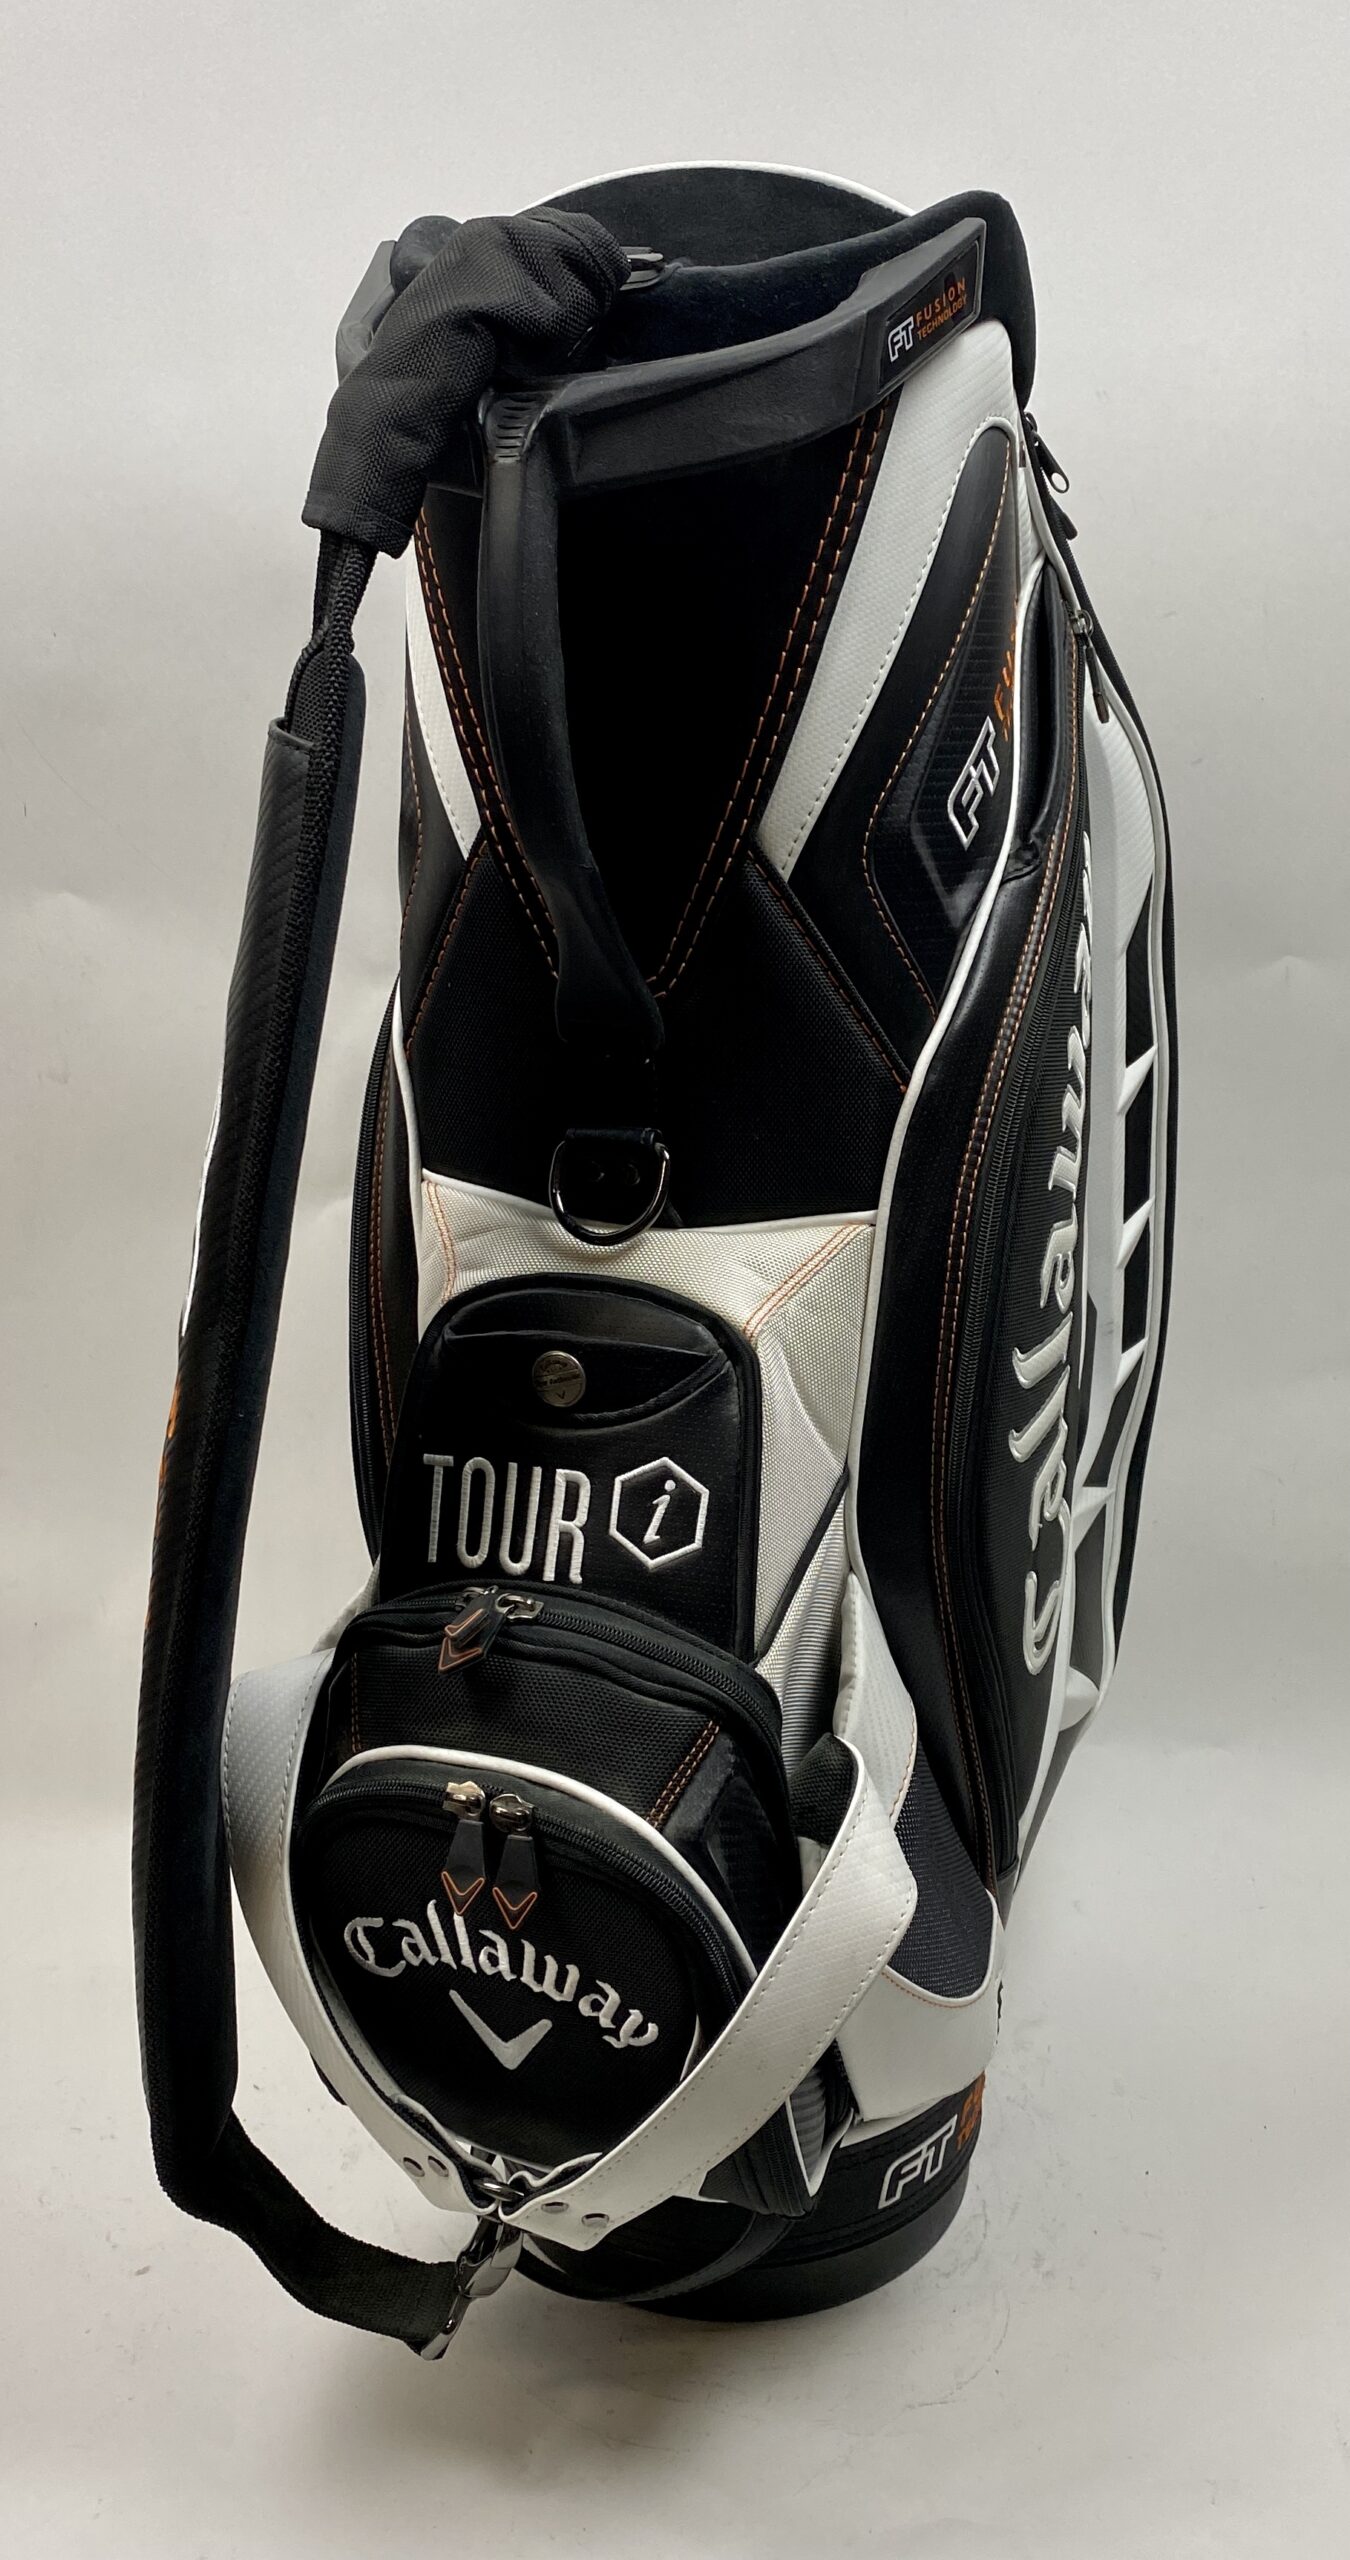 Vessel Player III 6-Way x Ghost Maverick 14-Way Golf Bag Comparison  Pictures - Golf Bags/Carts/Headcovers - GolfWRX